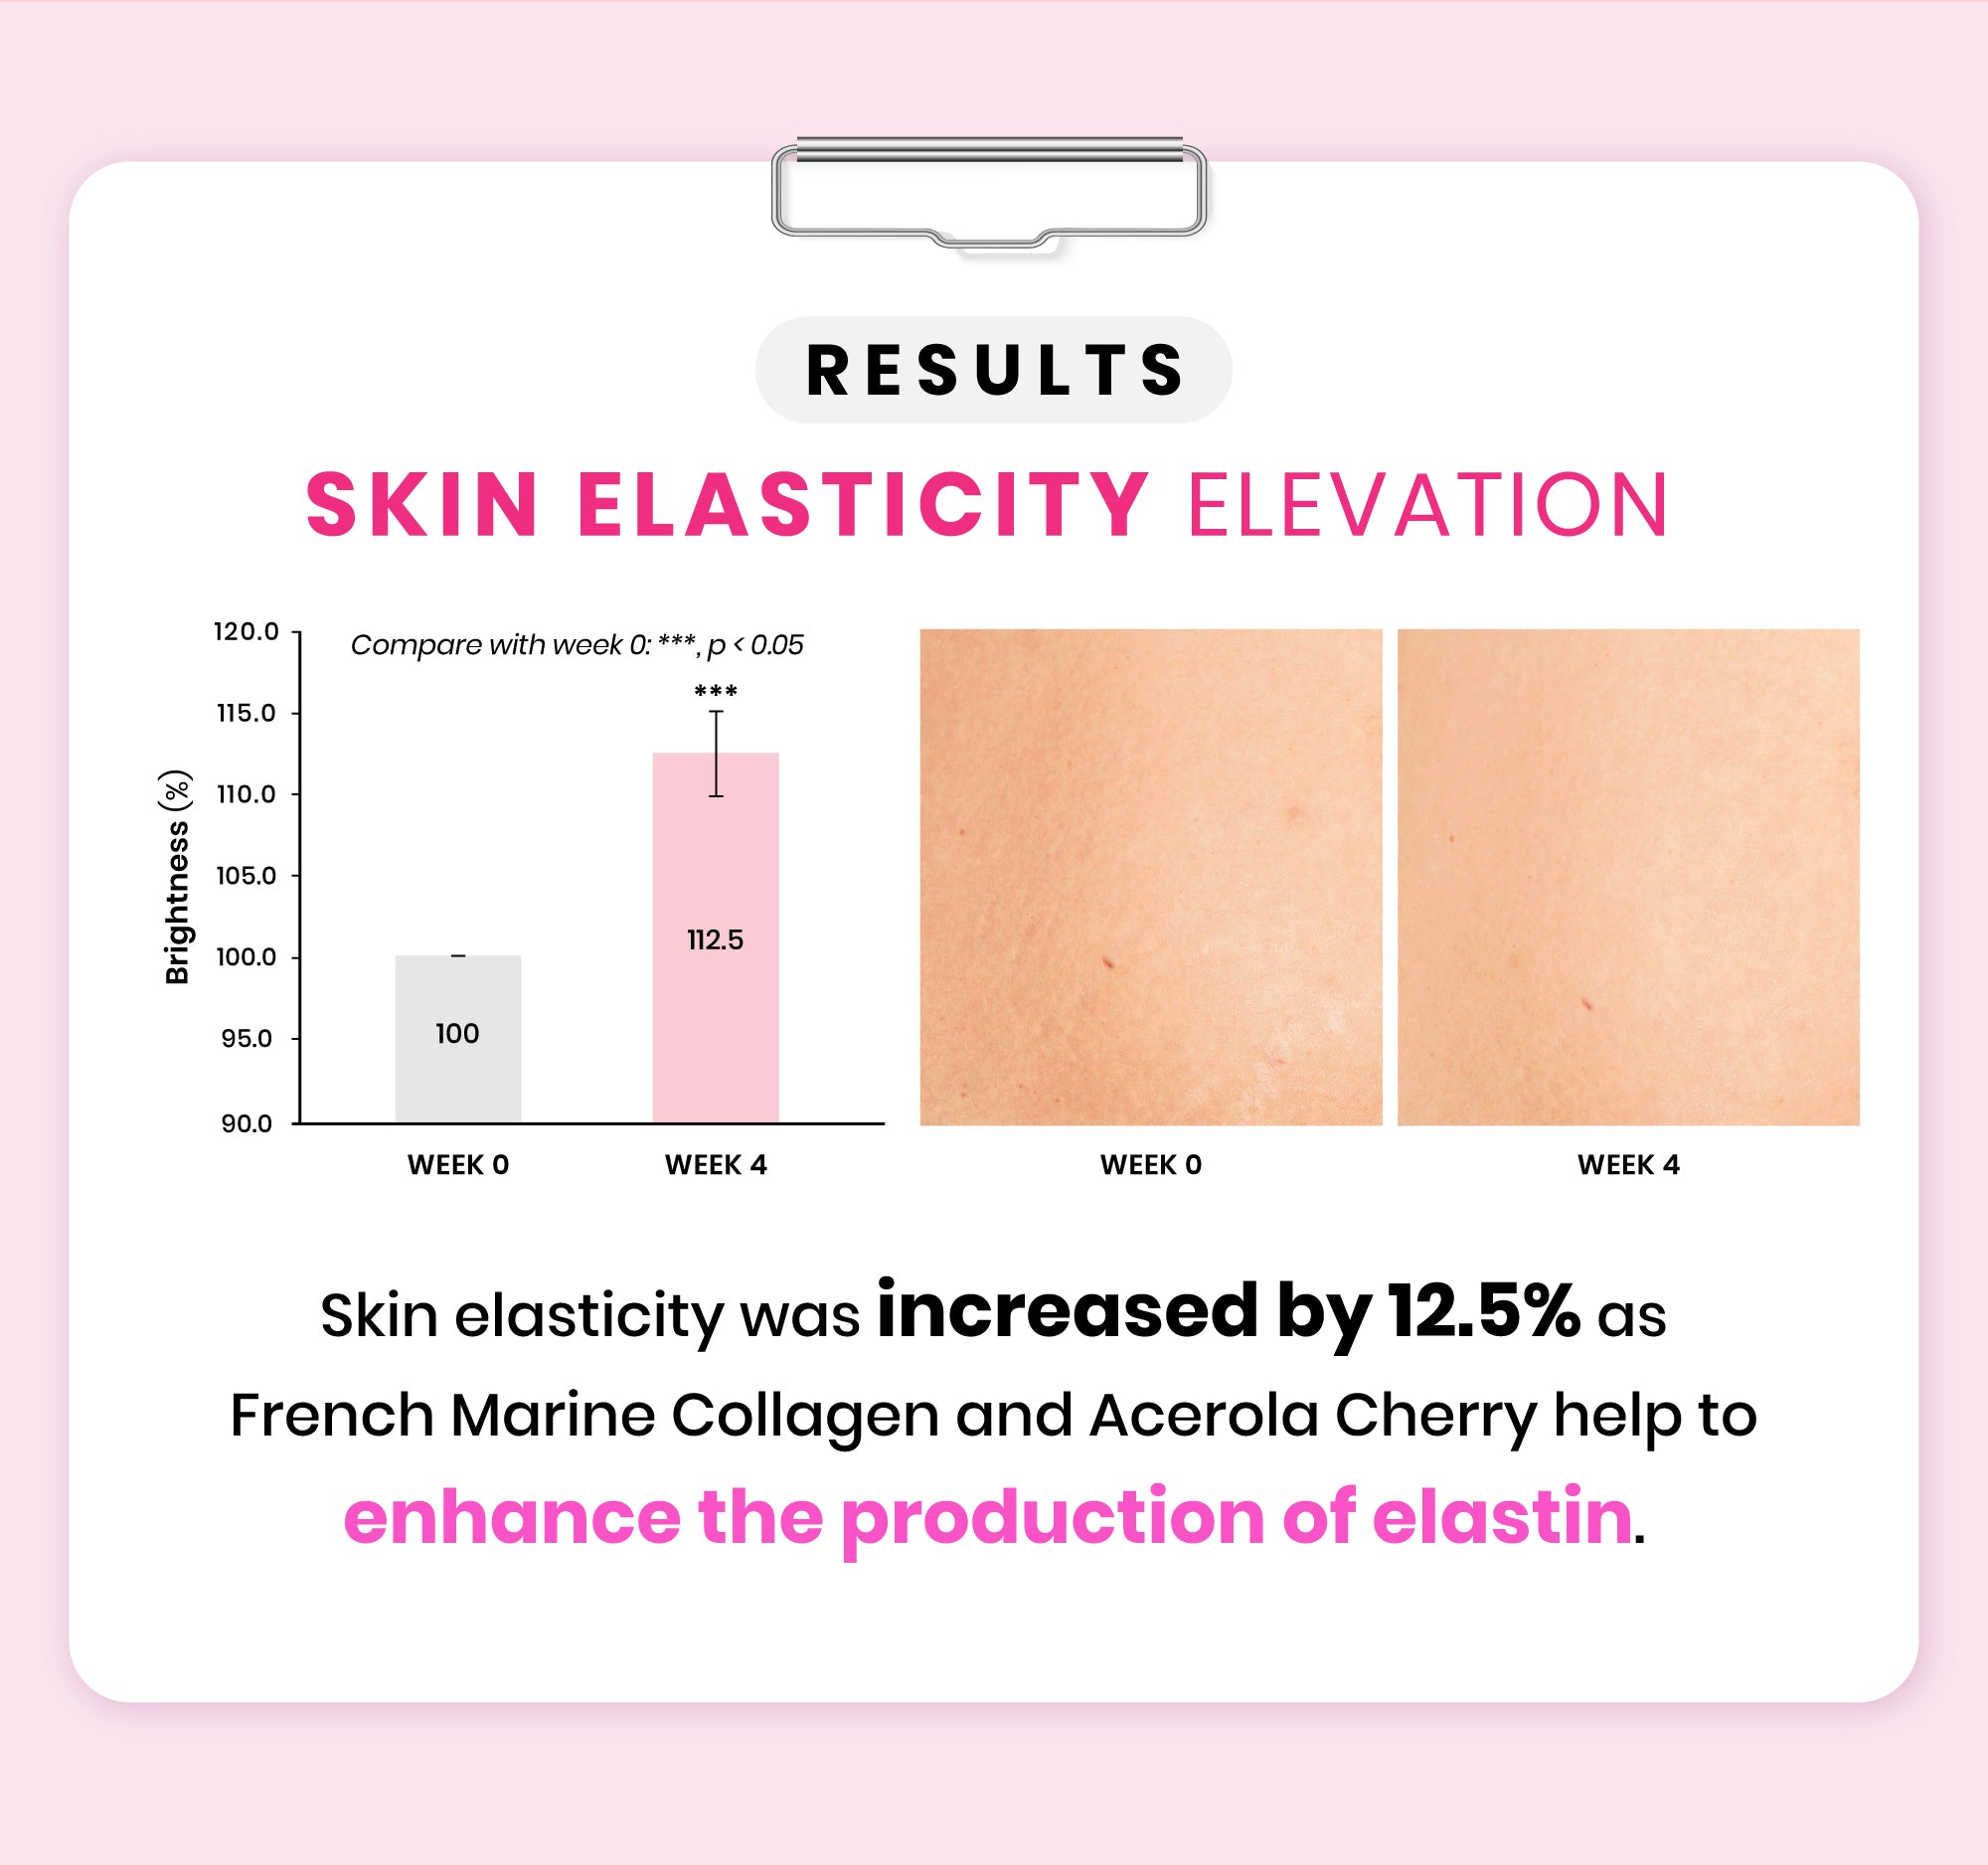 Avalon Stemcell Beauty Drink able to increase skin elasticity by 12.5% with the help of French Marine Collagen. Meanwhile, the addition of Acerola cherry helps to enhance the production of elastin.